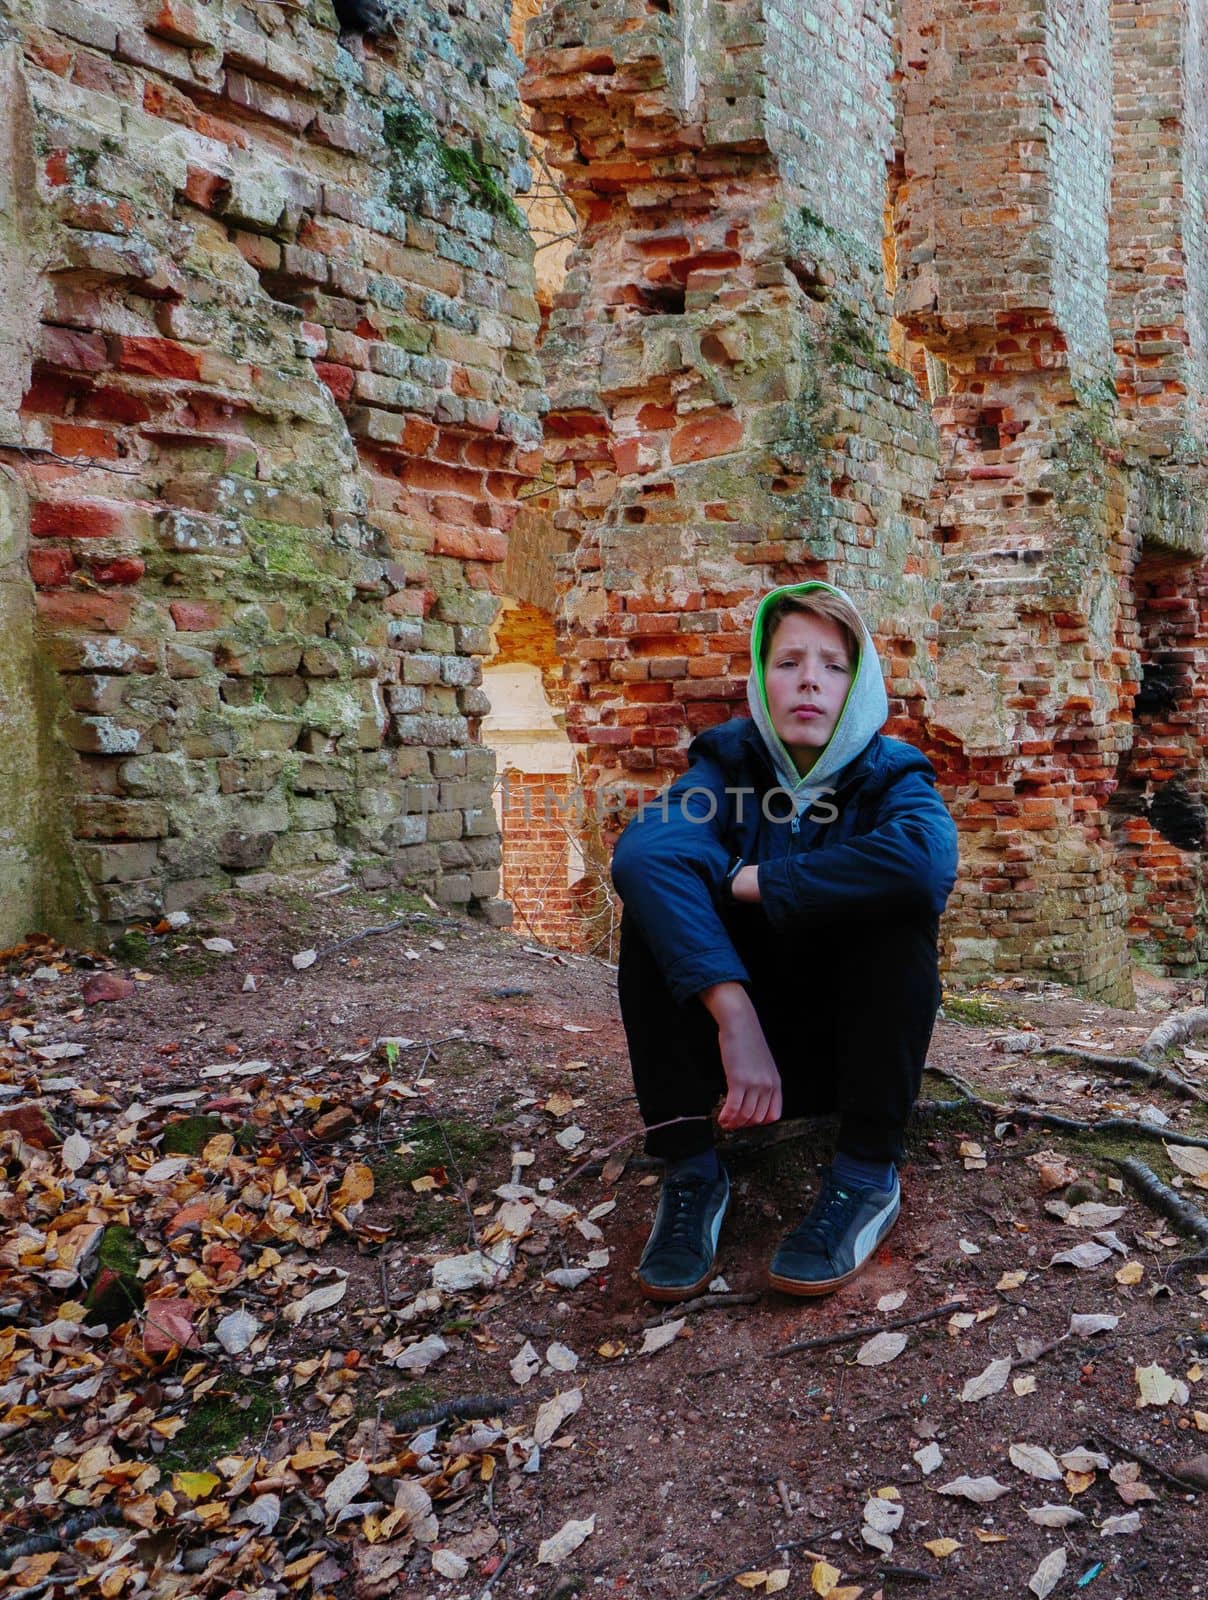 A teenager in a blue jacket sits next to an old ruined brick wall in autumn. A sad boy of 2-15 years old sits on the ground near the destroyed red brick wall.